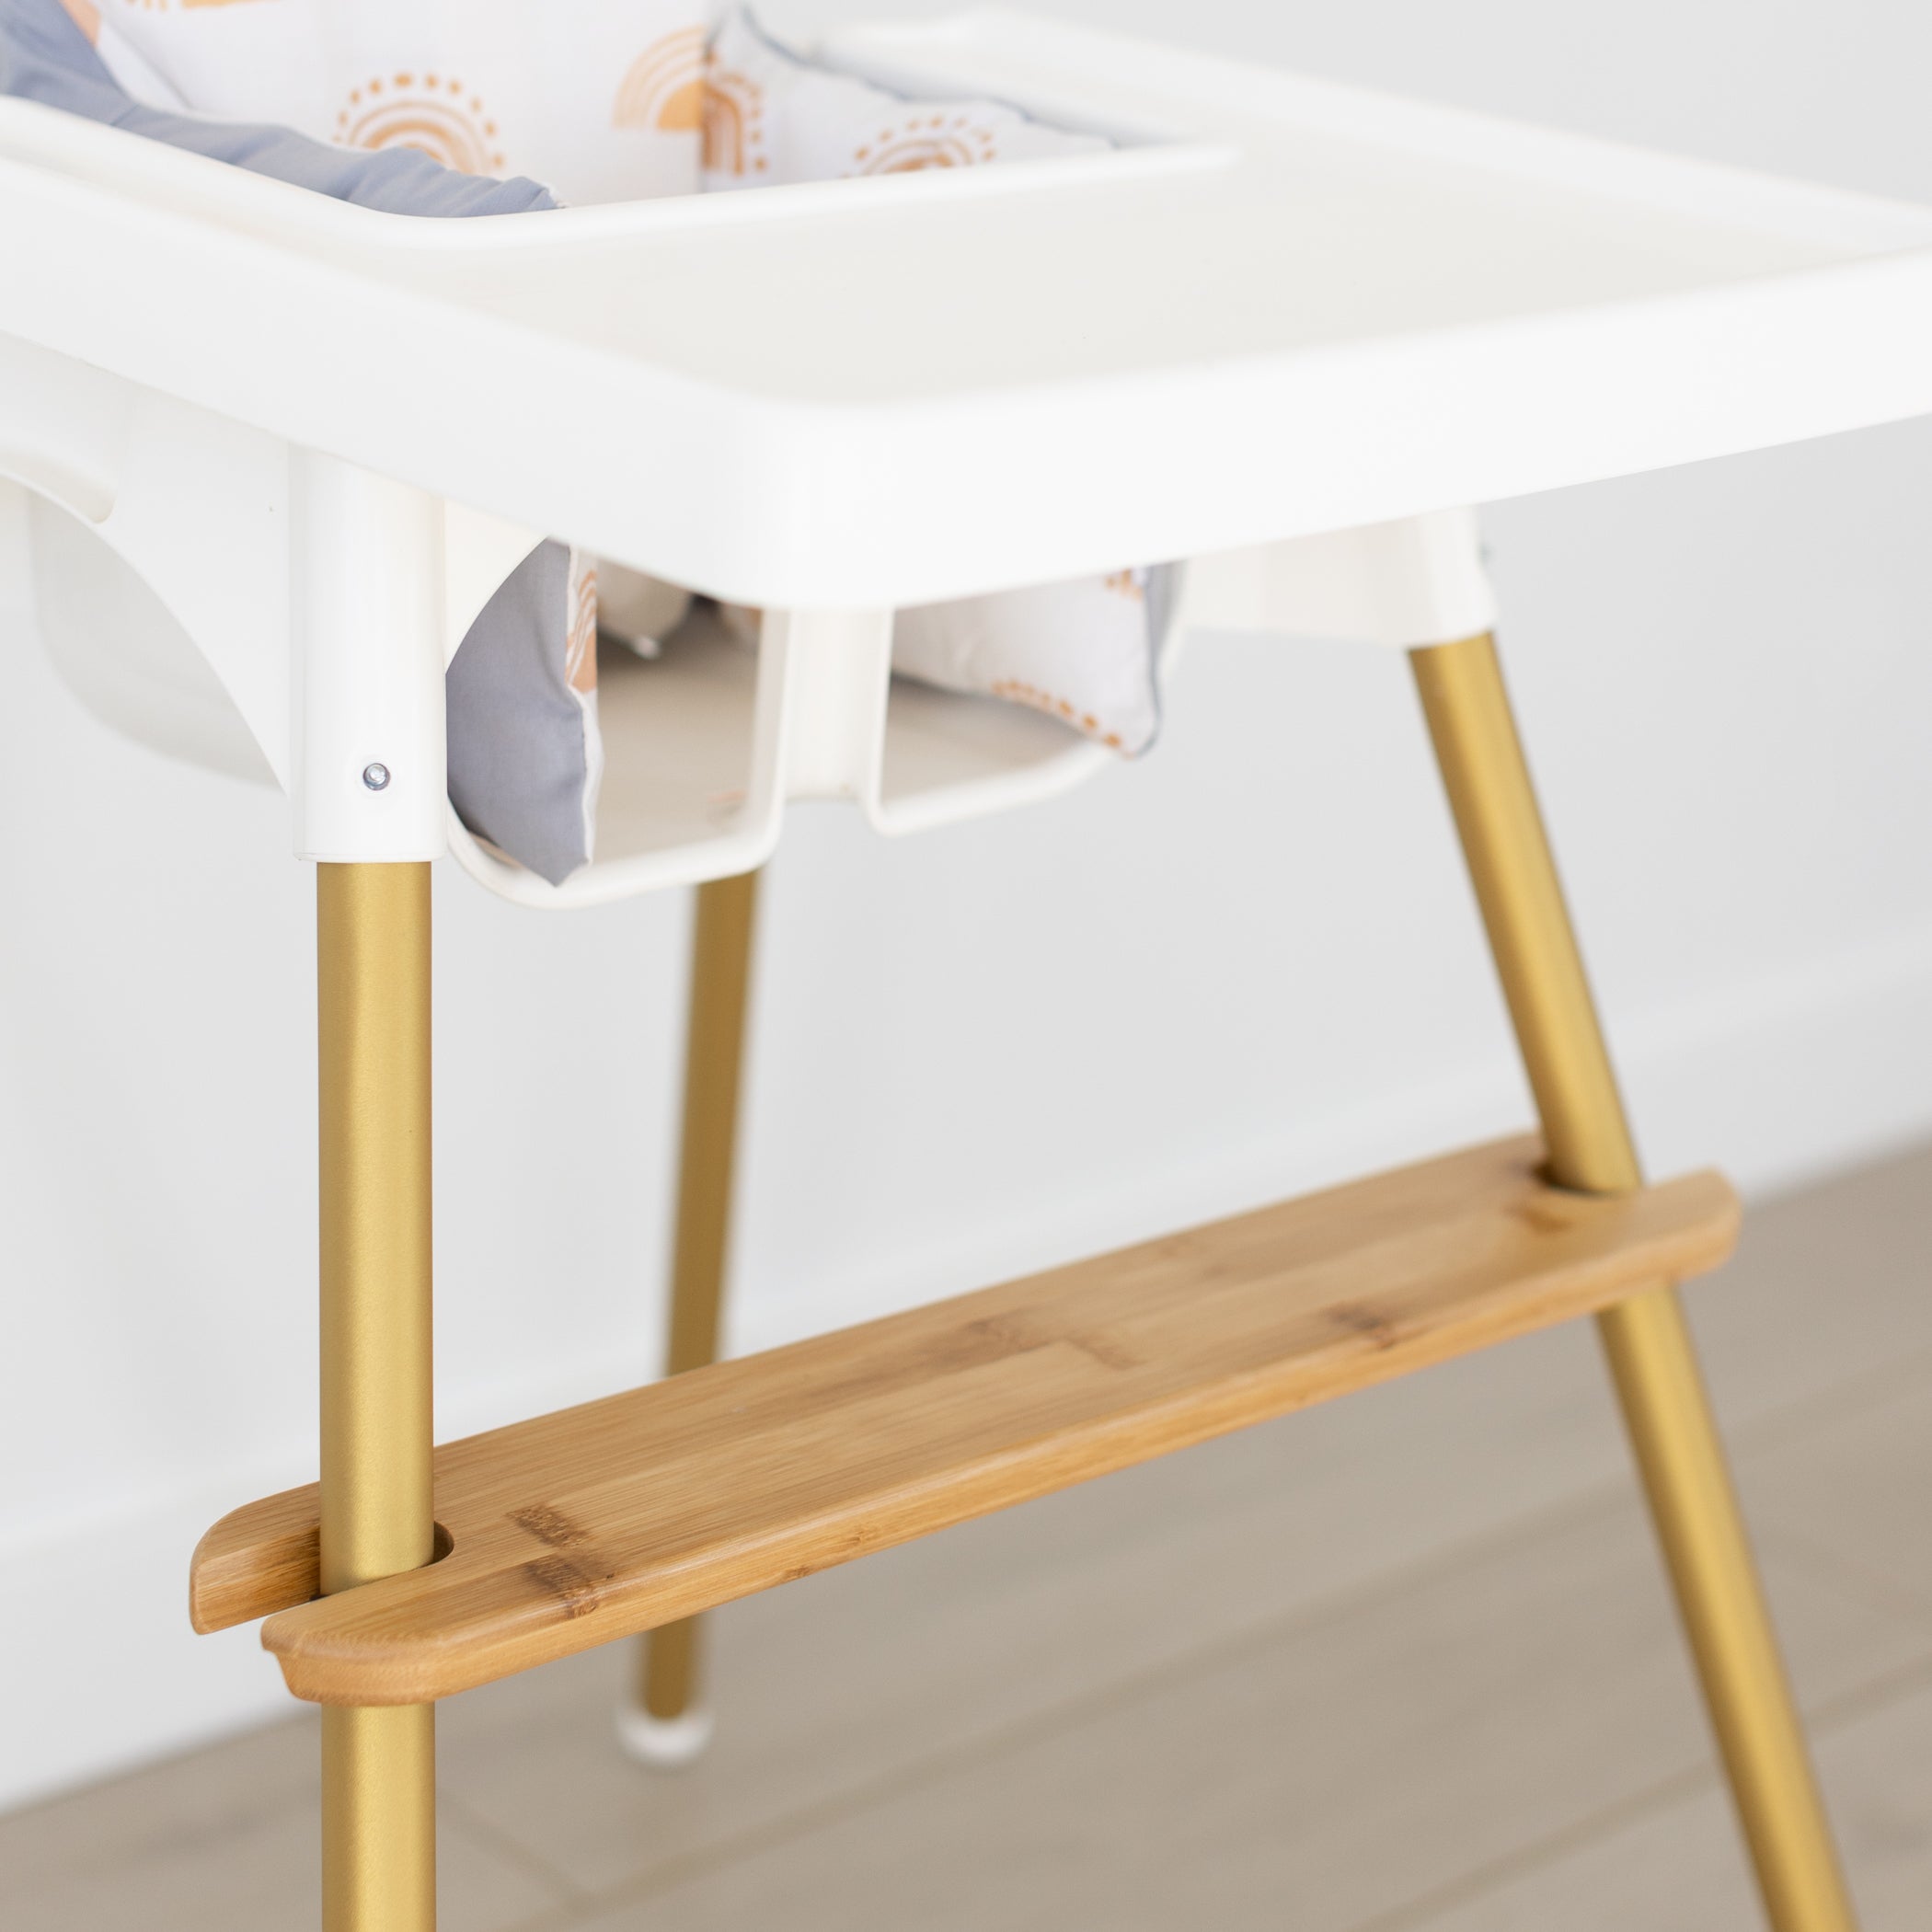 TLBB High Chair Footrest, Adjustable Height Natural Bamboo Baby Highchairs Pedal, Suitable for IKEA Antilop High Chair Footstool (A)